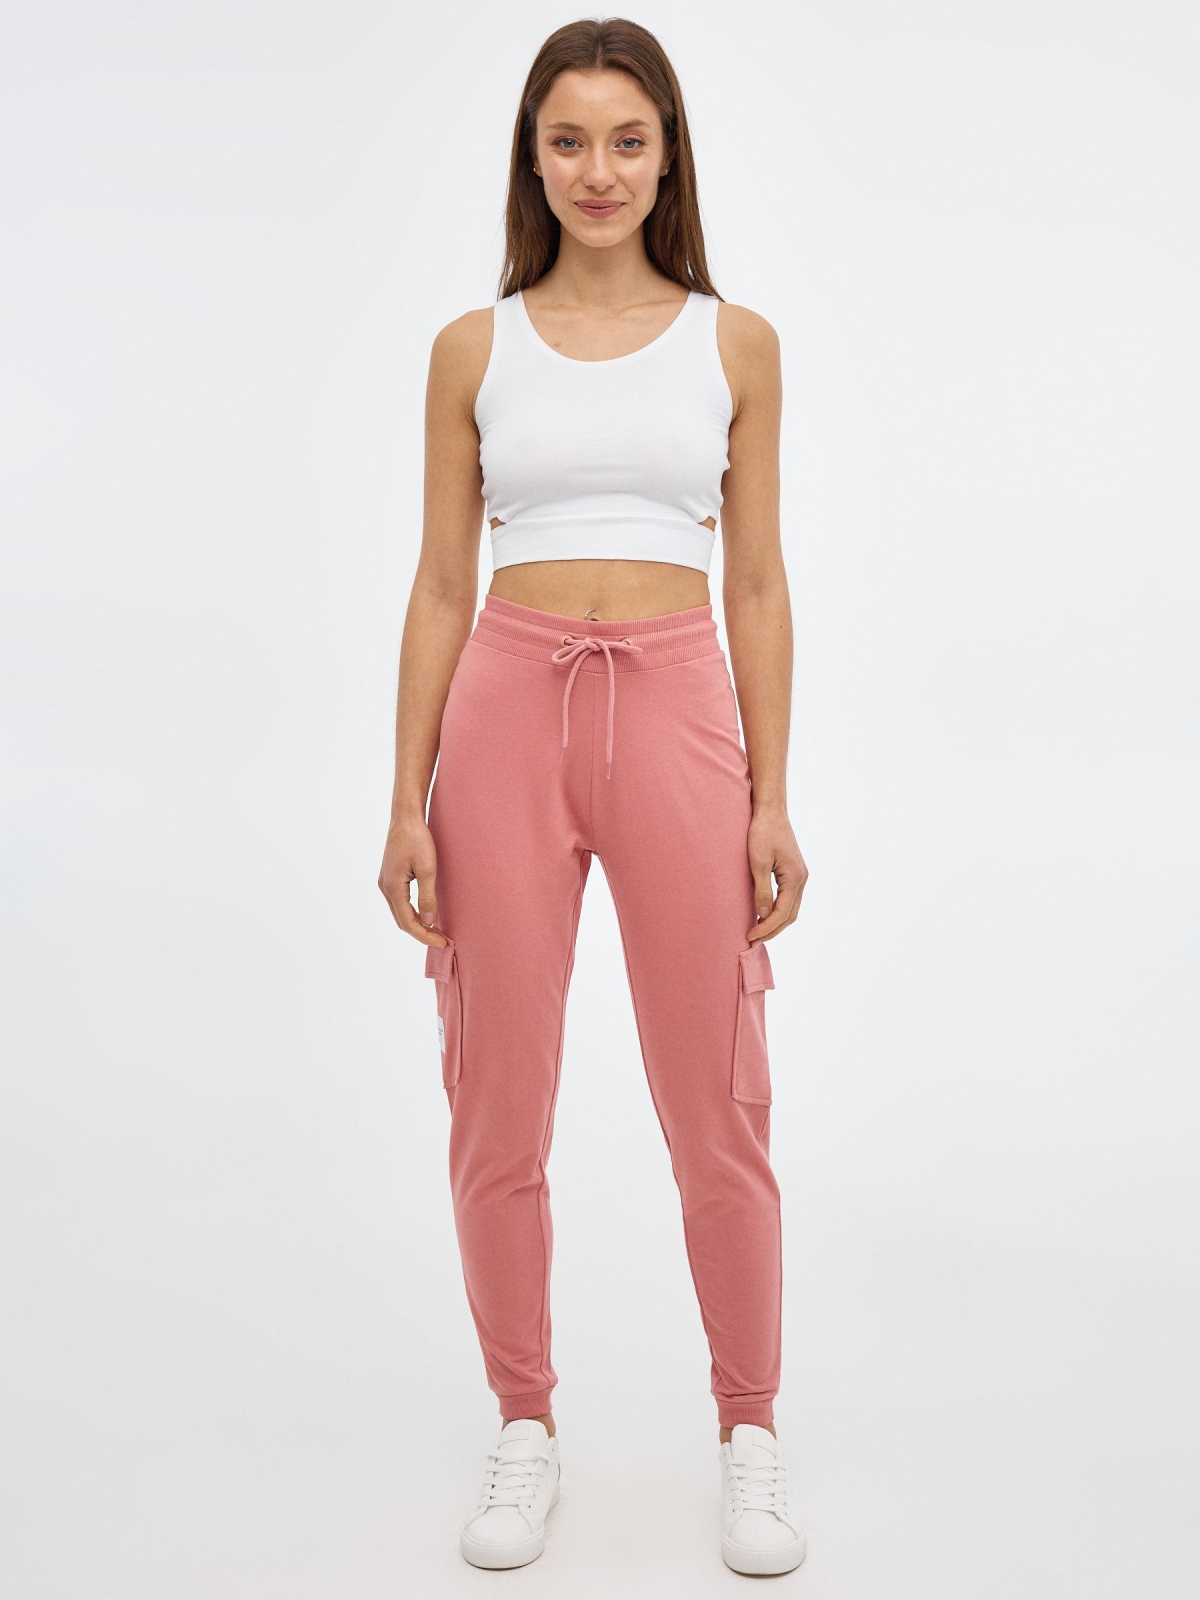 Plush jogger pants nude pink front view